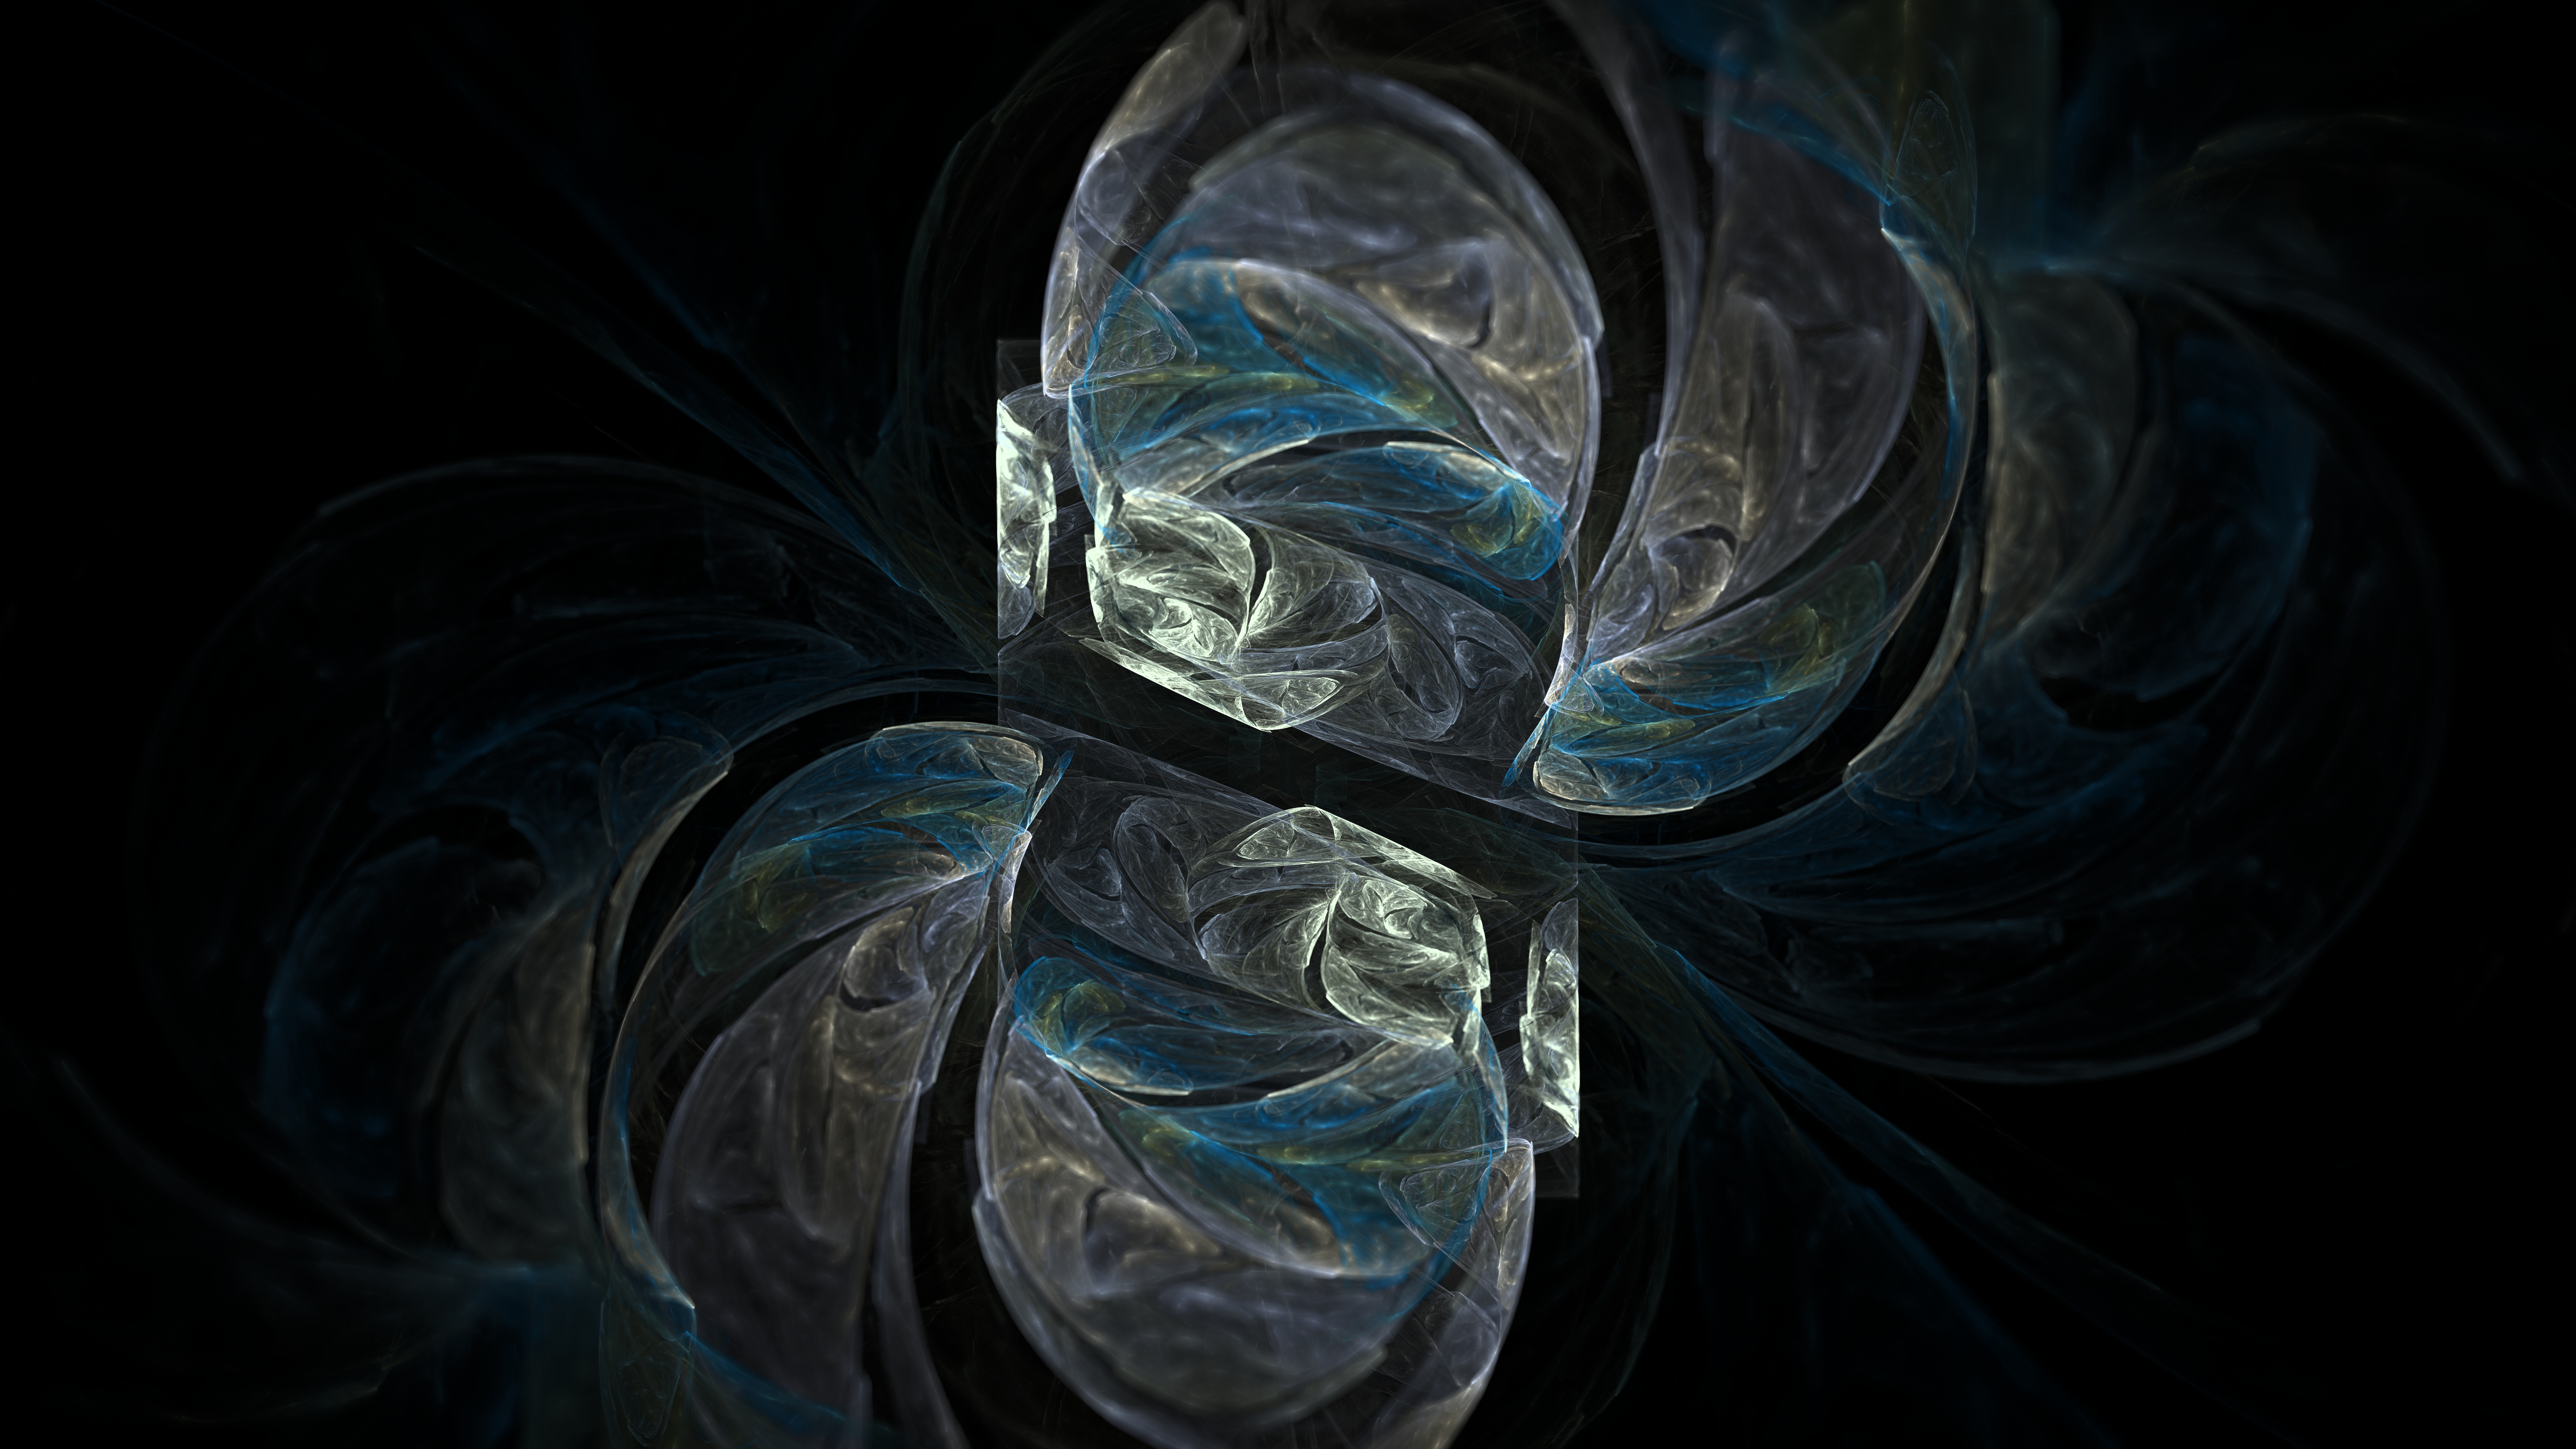 Fractal Fractal Flame Pattern Symmetry Bright Abstract Psychedelic Mathematics Wide Screen Technolog 7680x4320